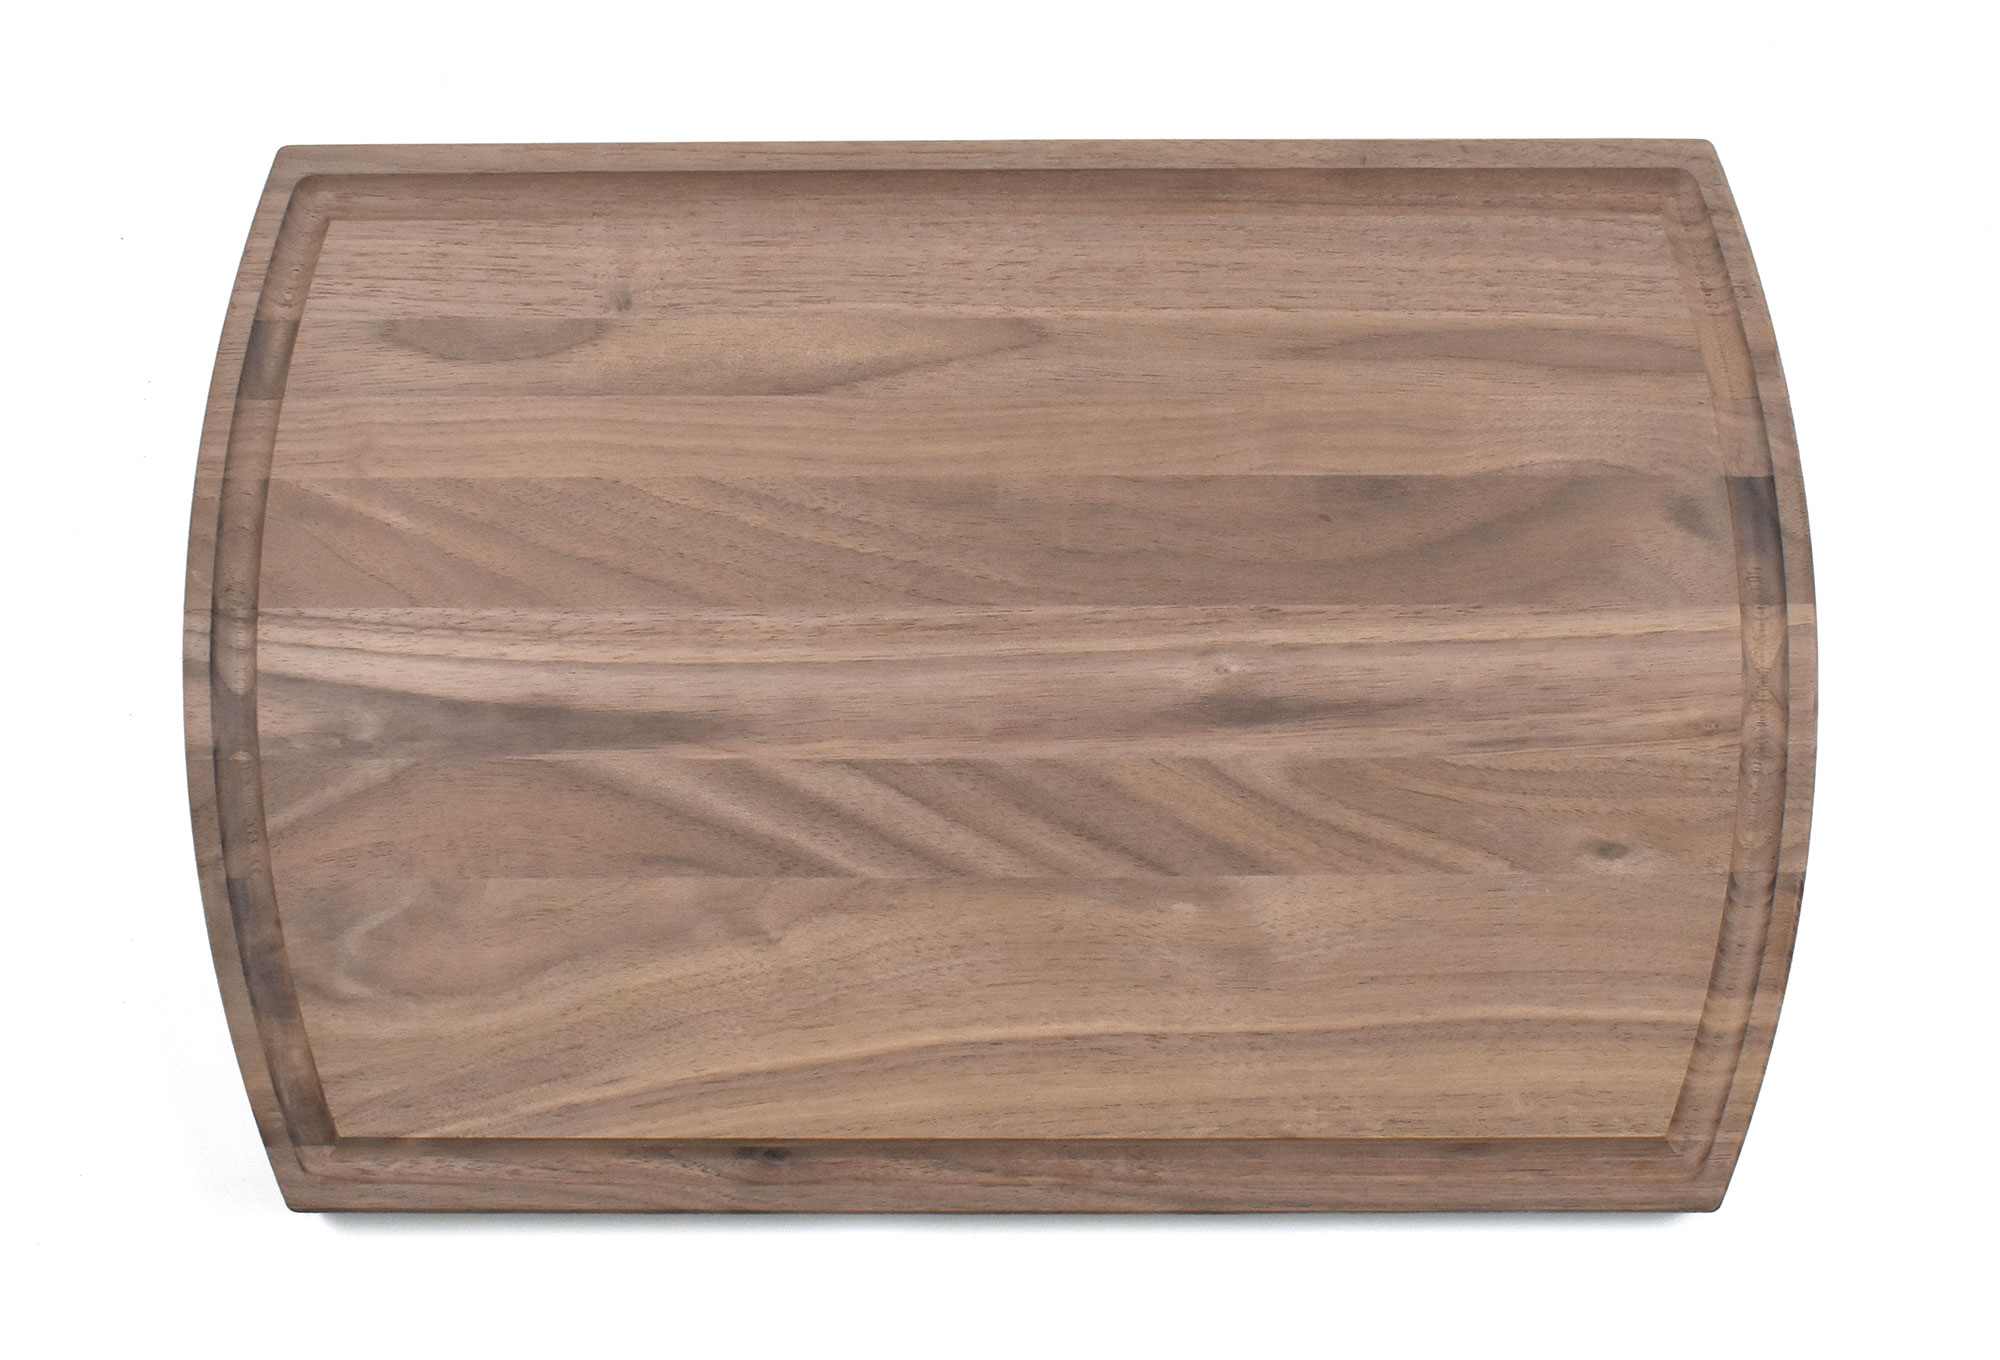 Large wooden cutting board